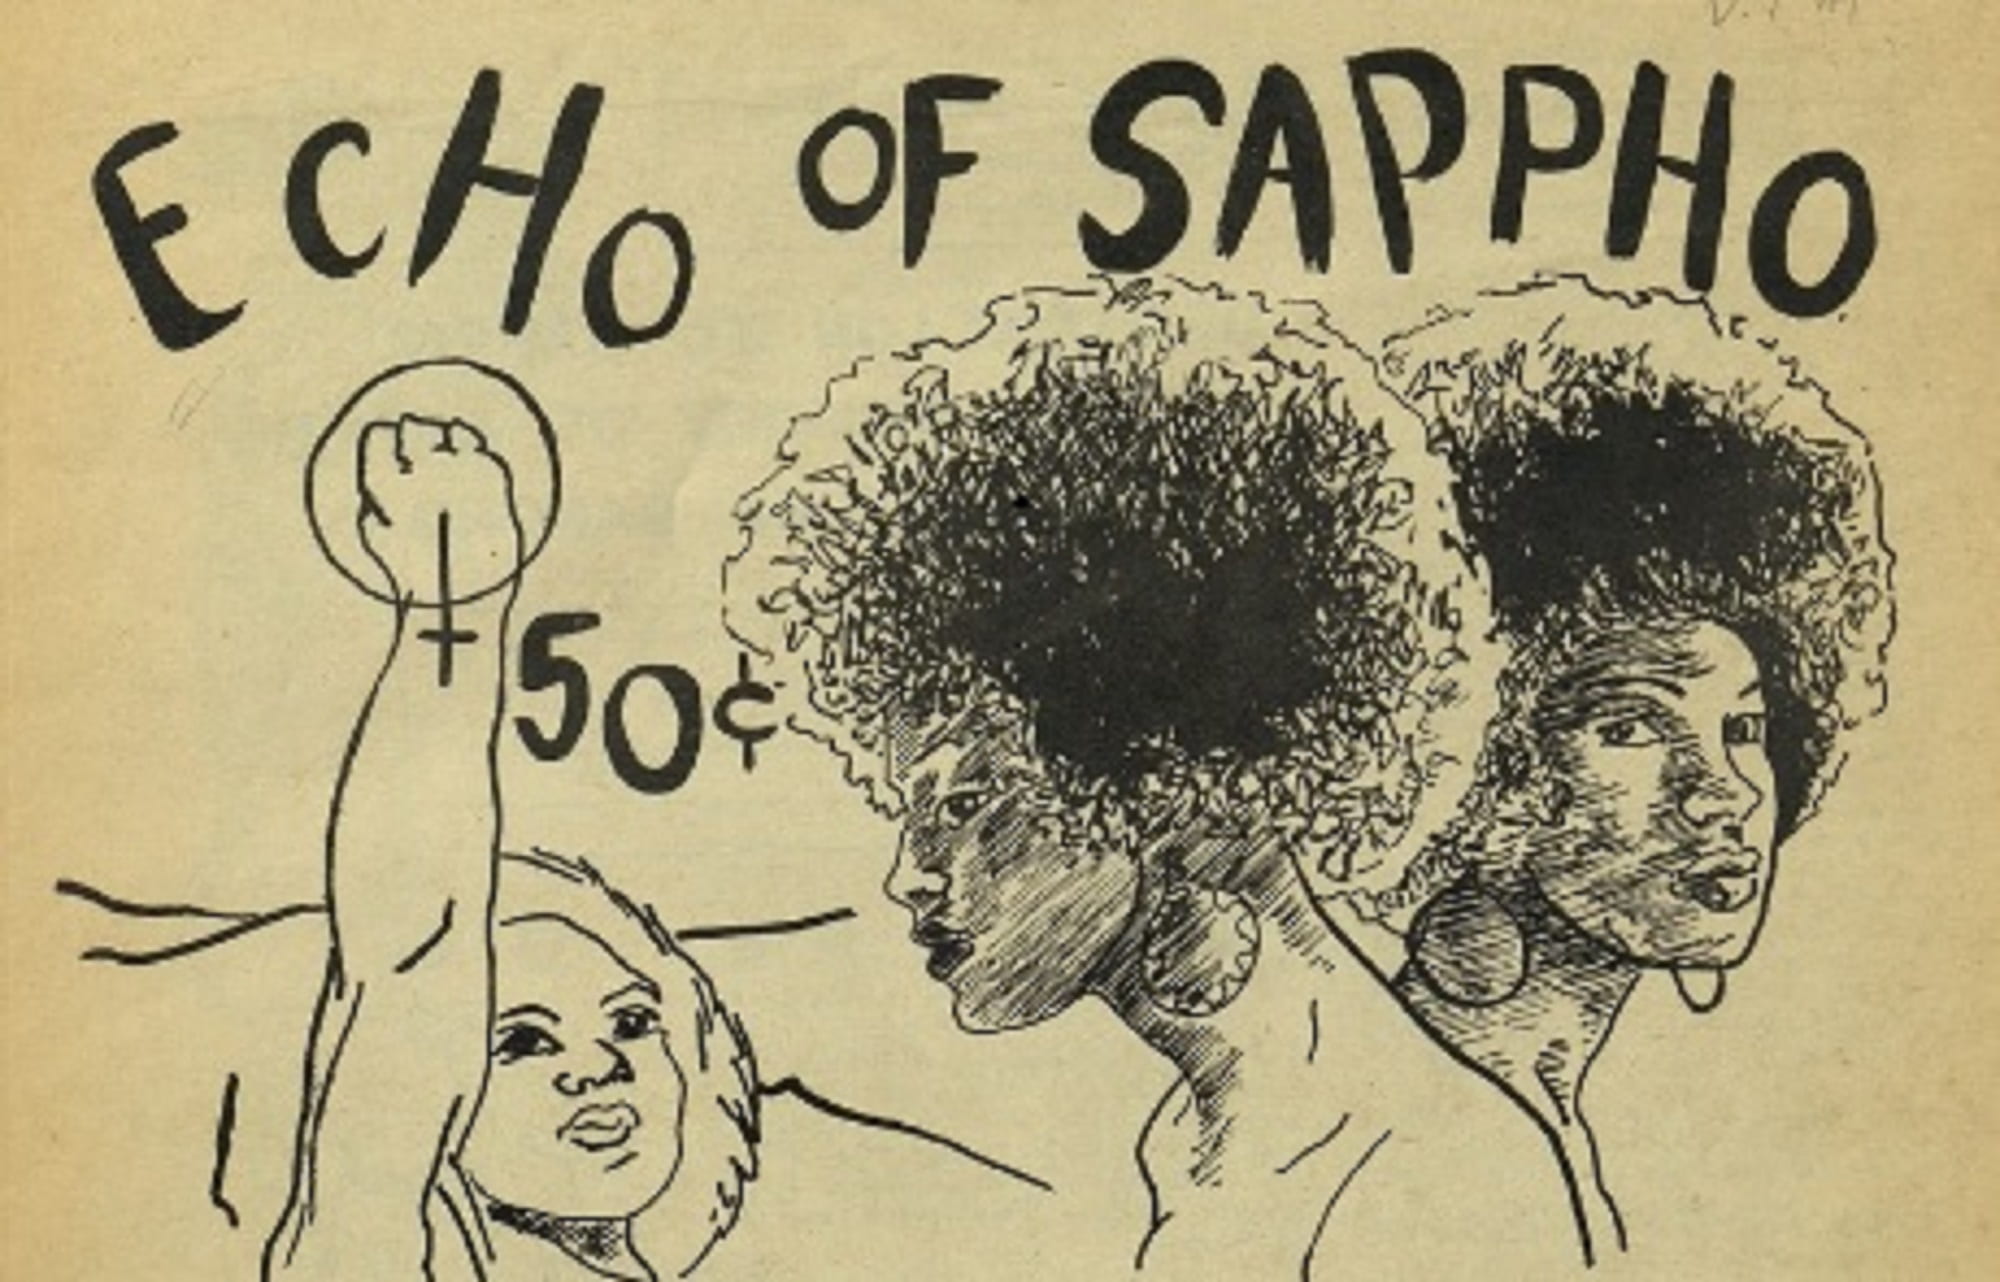 cropped cover of small press mag ECHO OF SAPPHO featuring Black women with afros and woman with fist raised